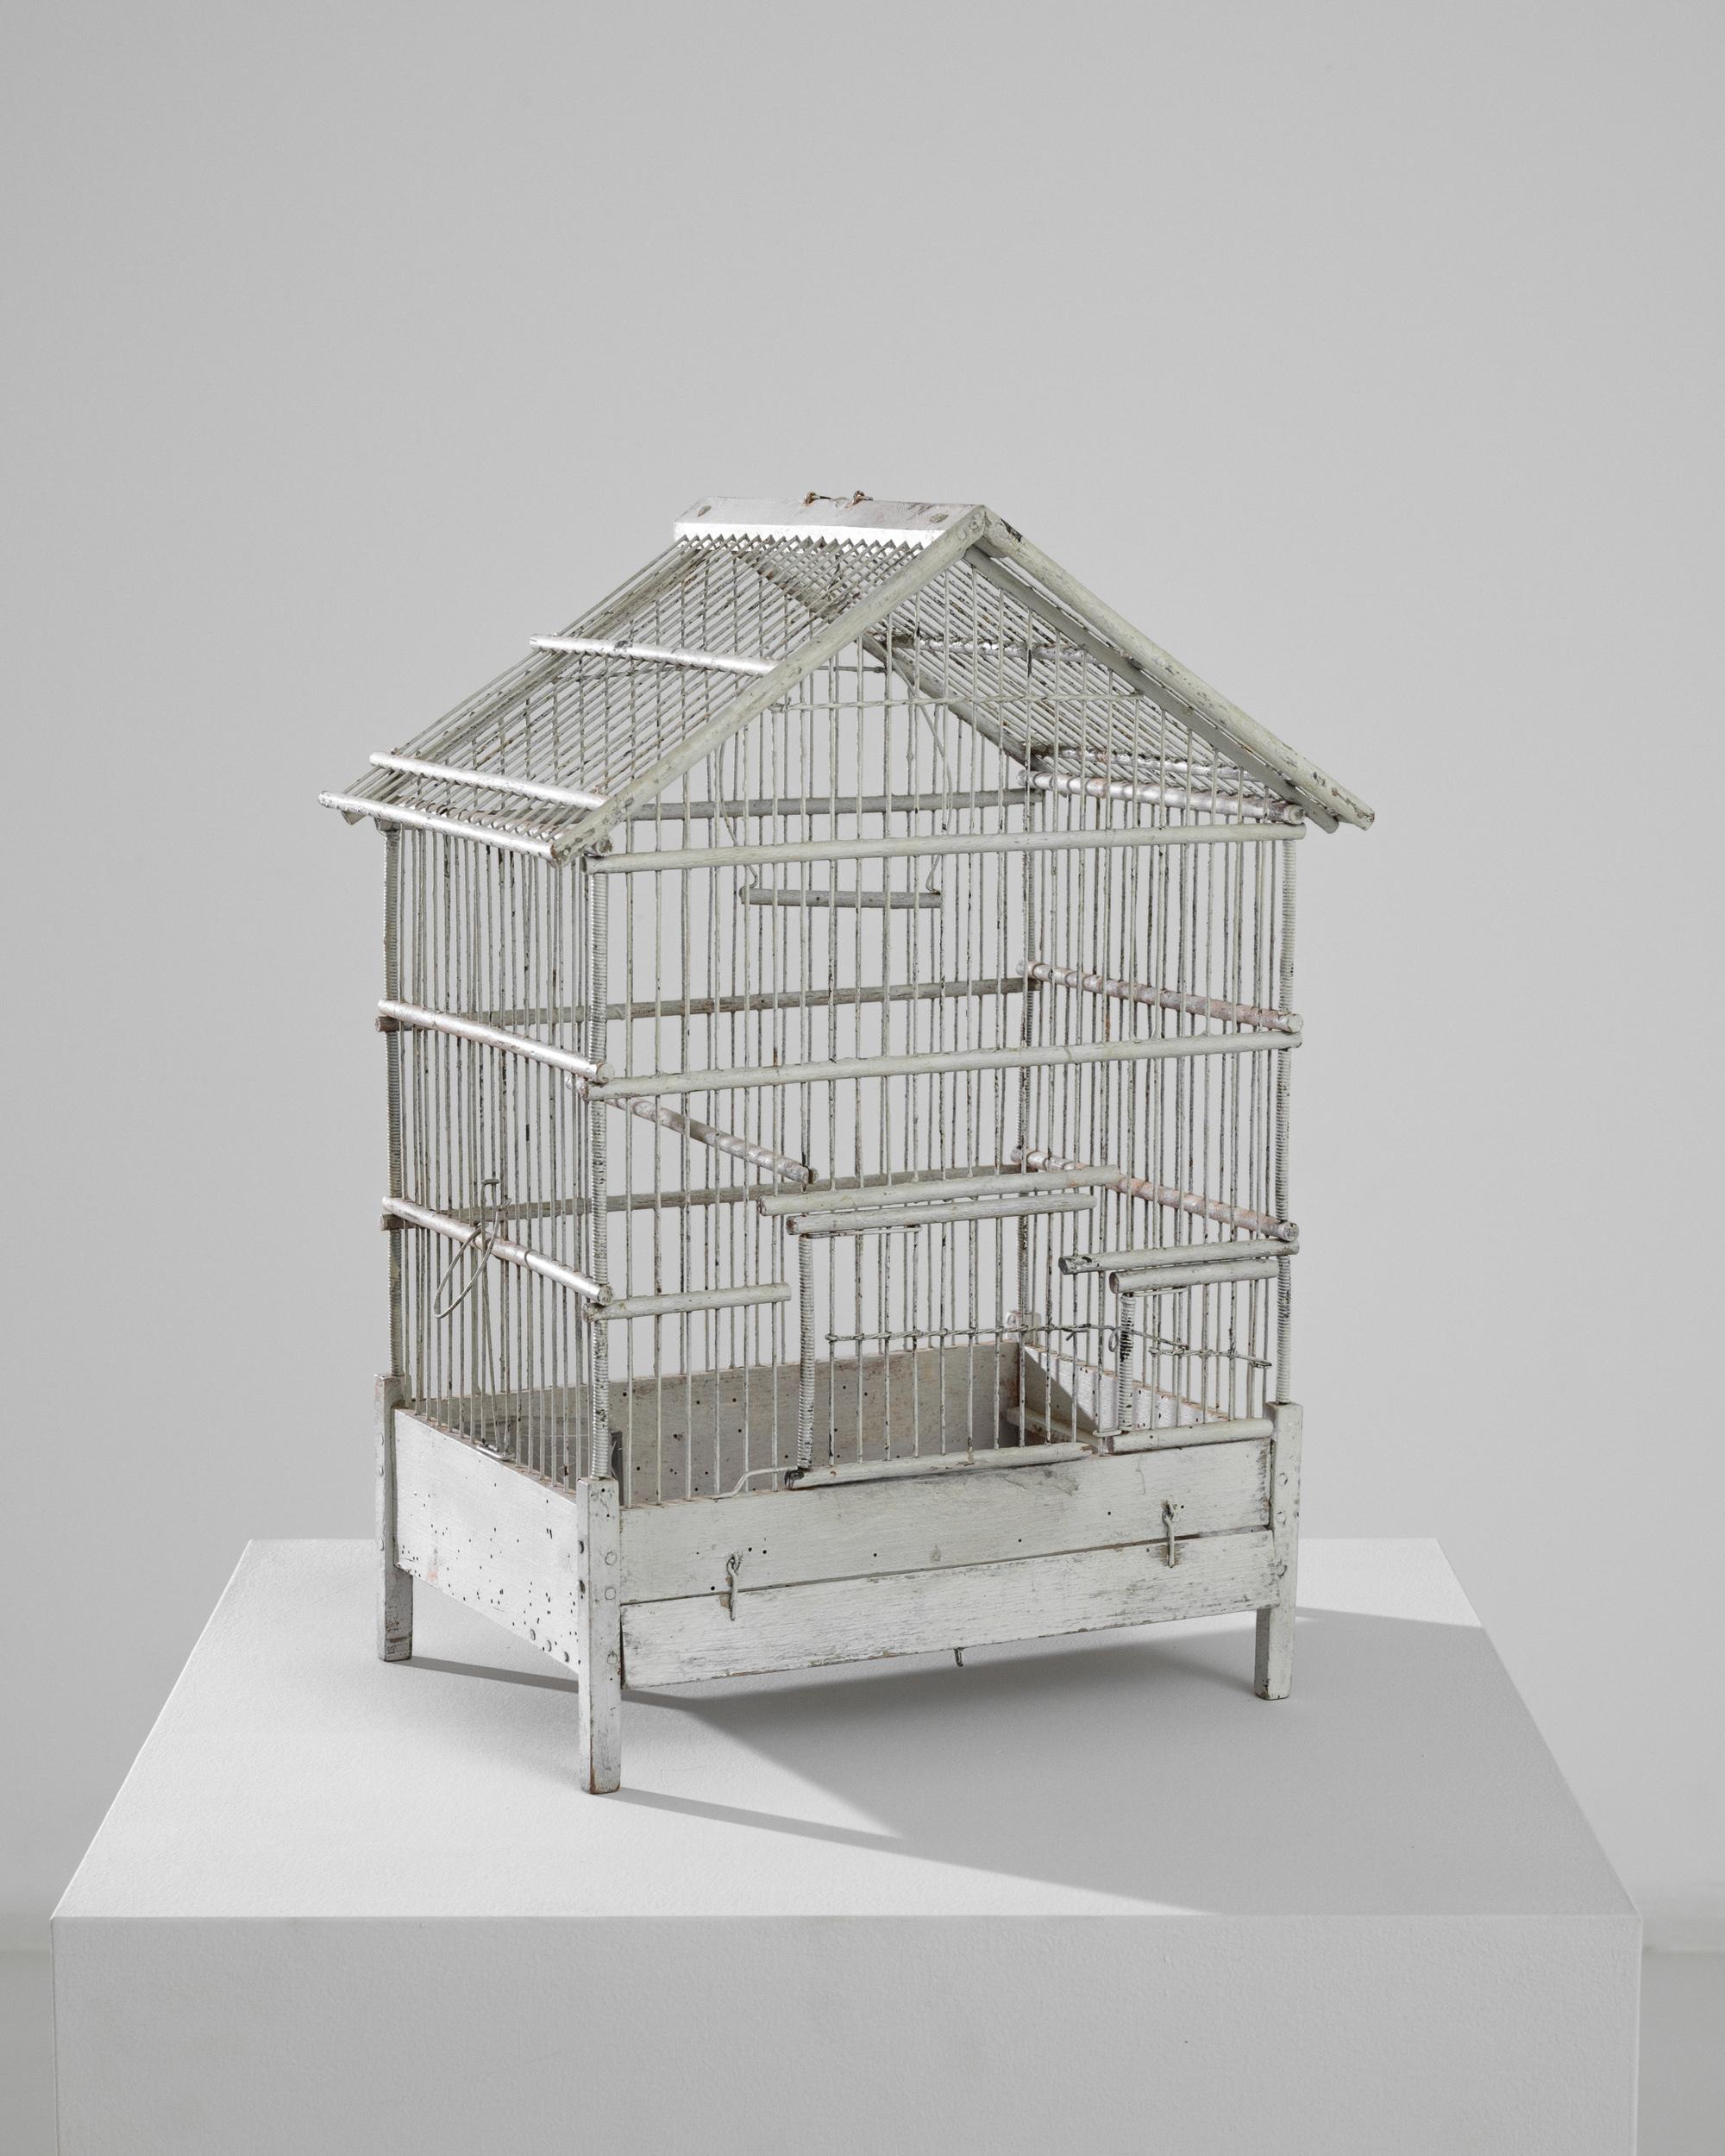 Whimsical and nostalgic, this metal birdcage brings French country charm to a space. Made at the turn of the century, the white wire silhouette suggests a cottage with a peaked roof. A variety of rods and swings would have offered the original